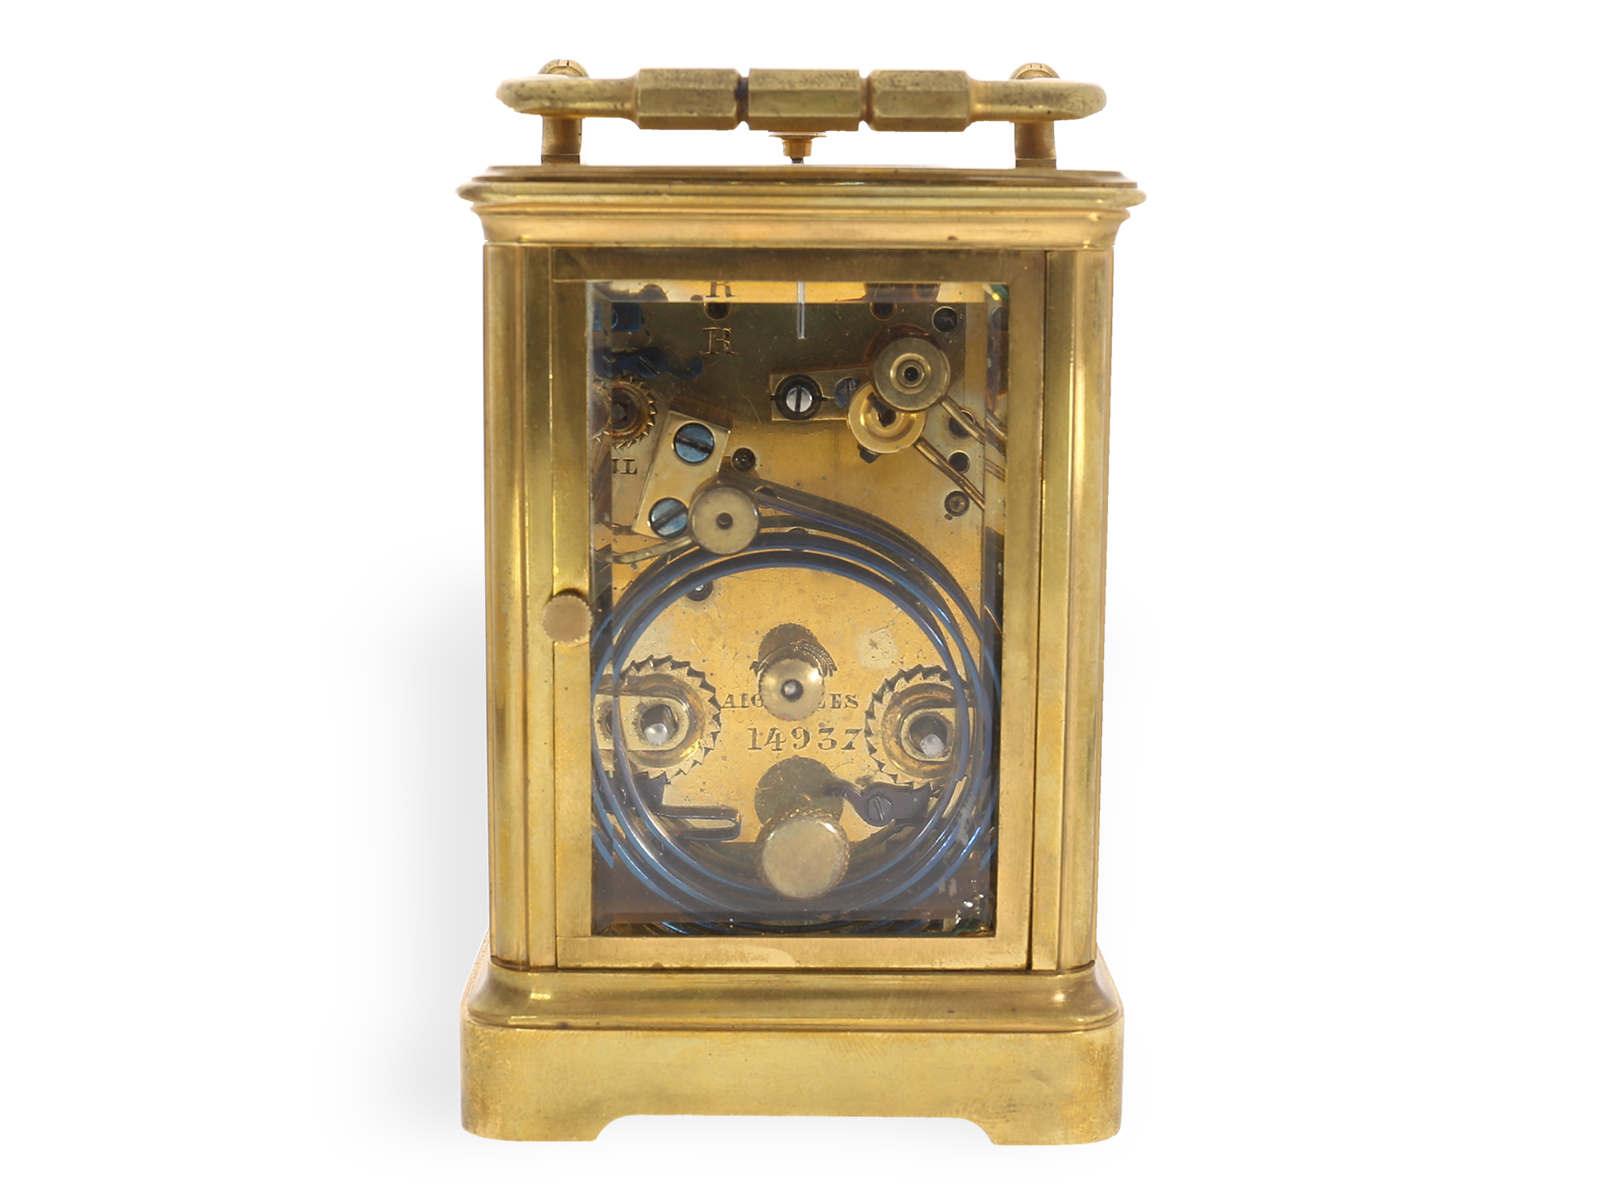 Exquisite, complicated travel clock with grande sonnerie, repeater and alarm, Leroy Paris, ca. 1900 - Image 4 of 5